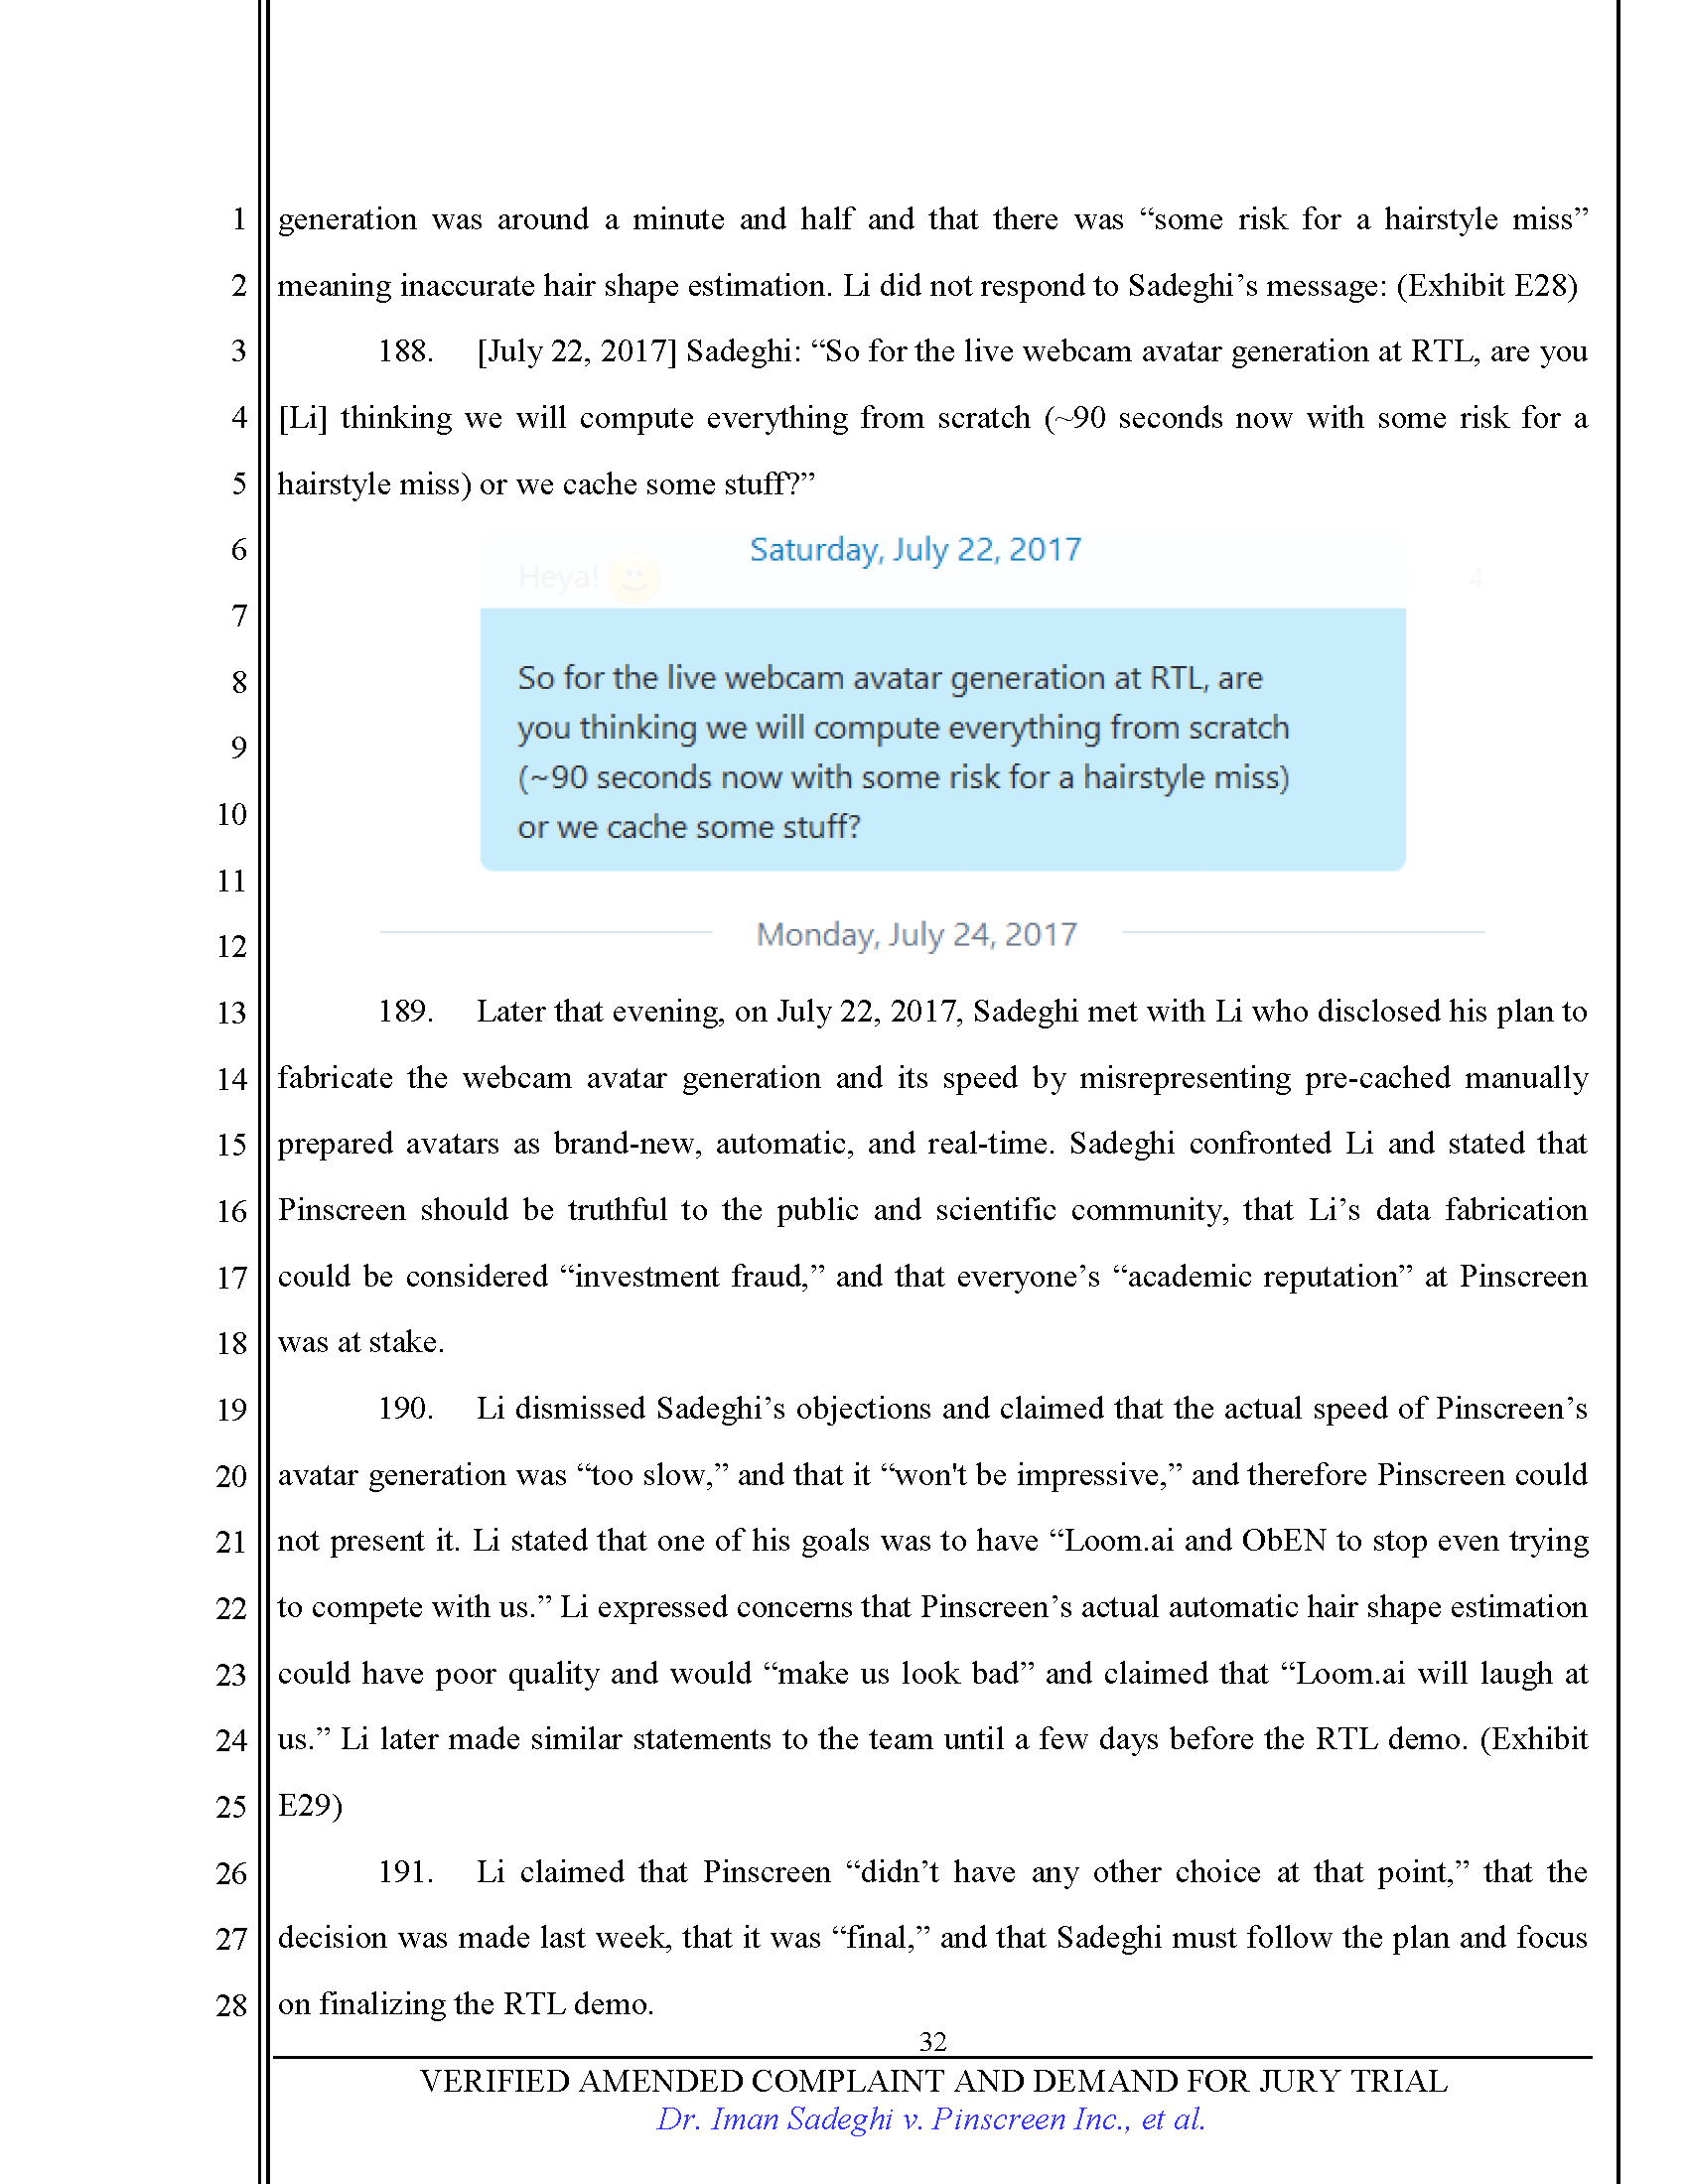 First Amended Complaint (FAC) Page 32